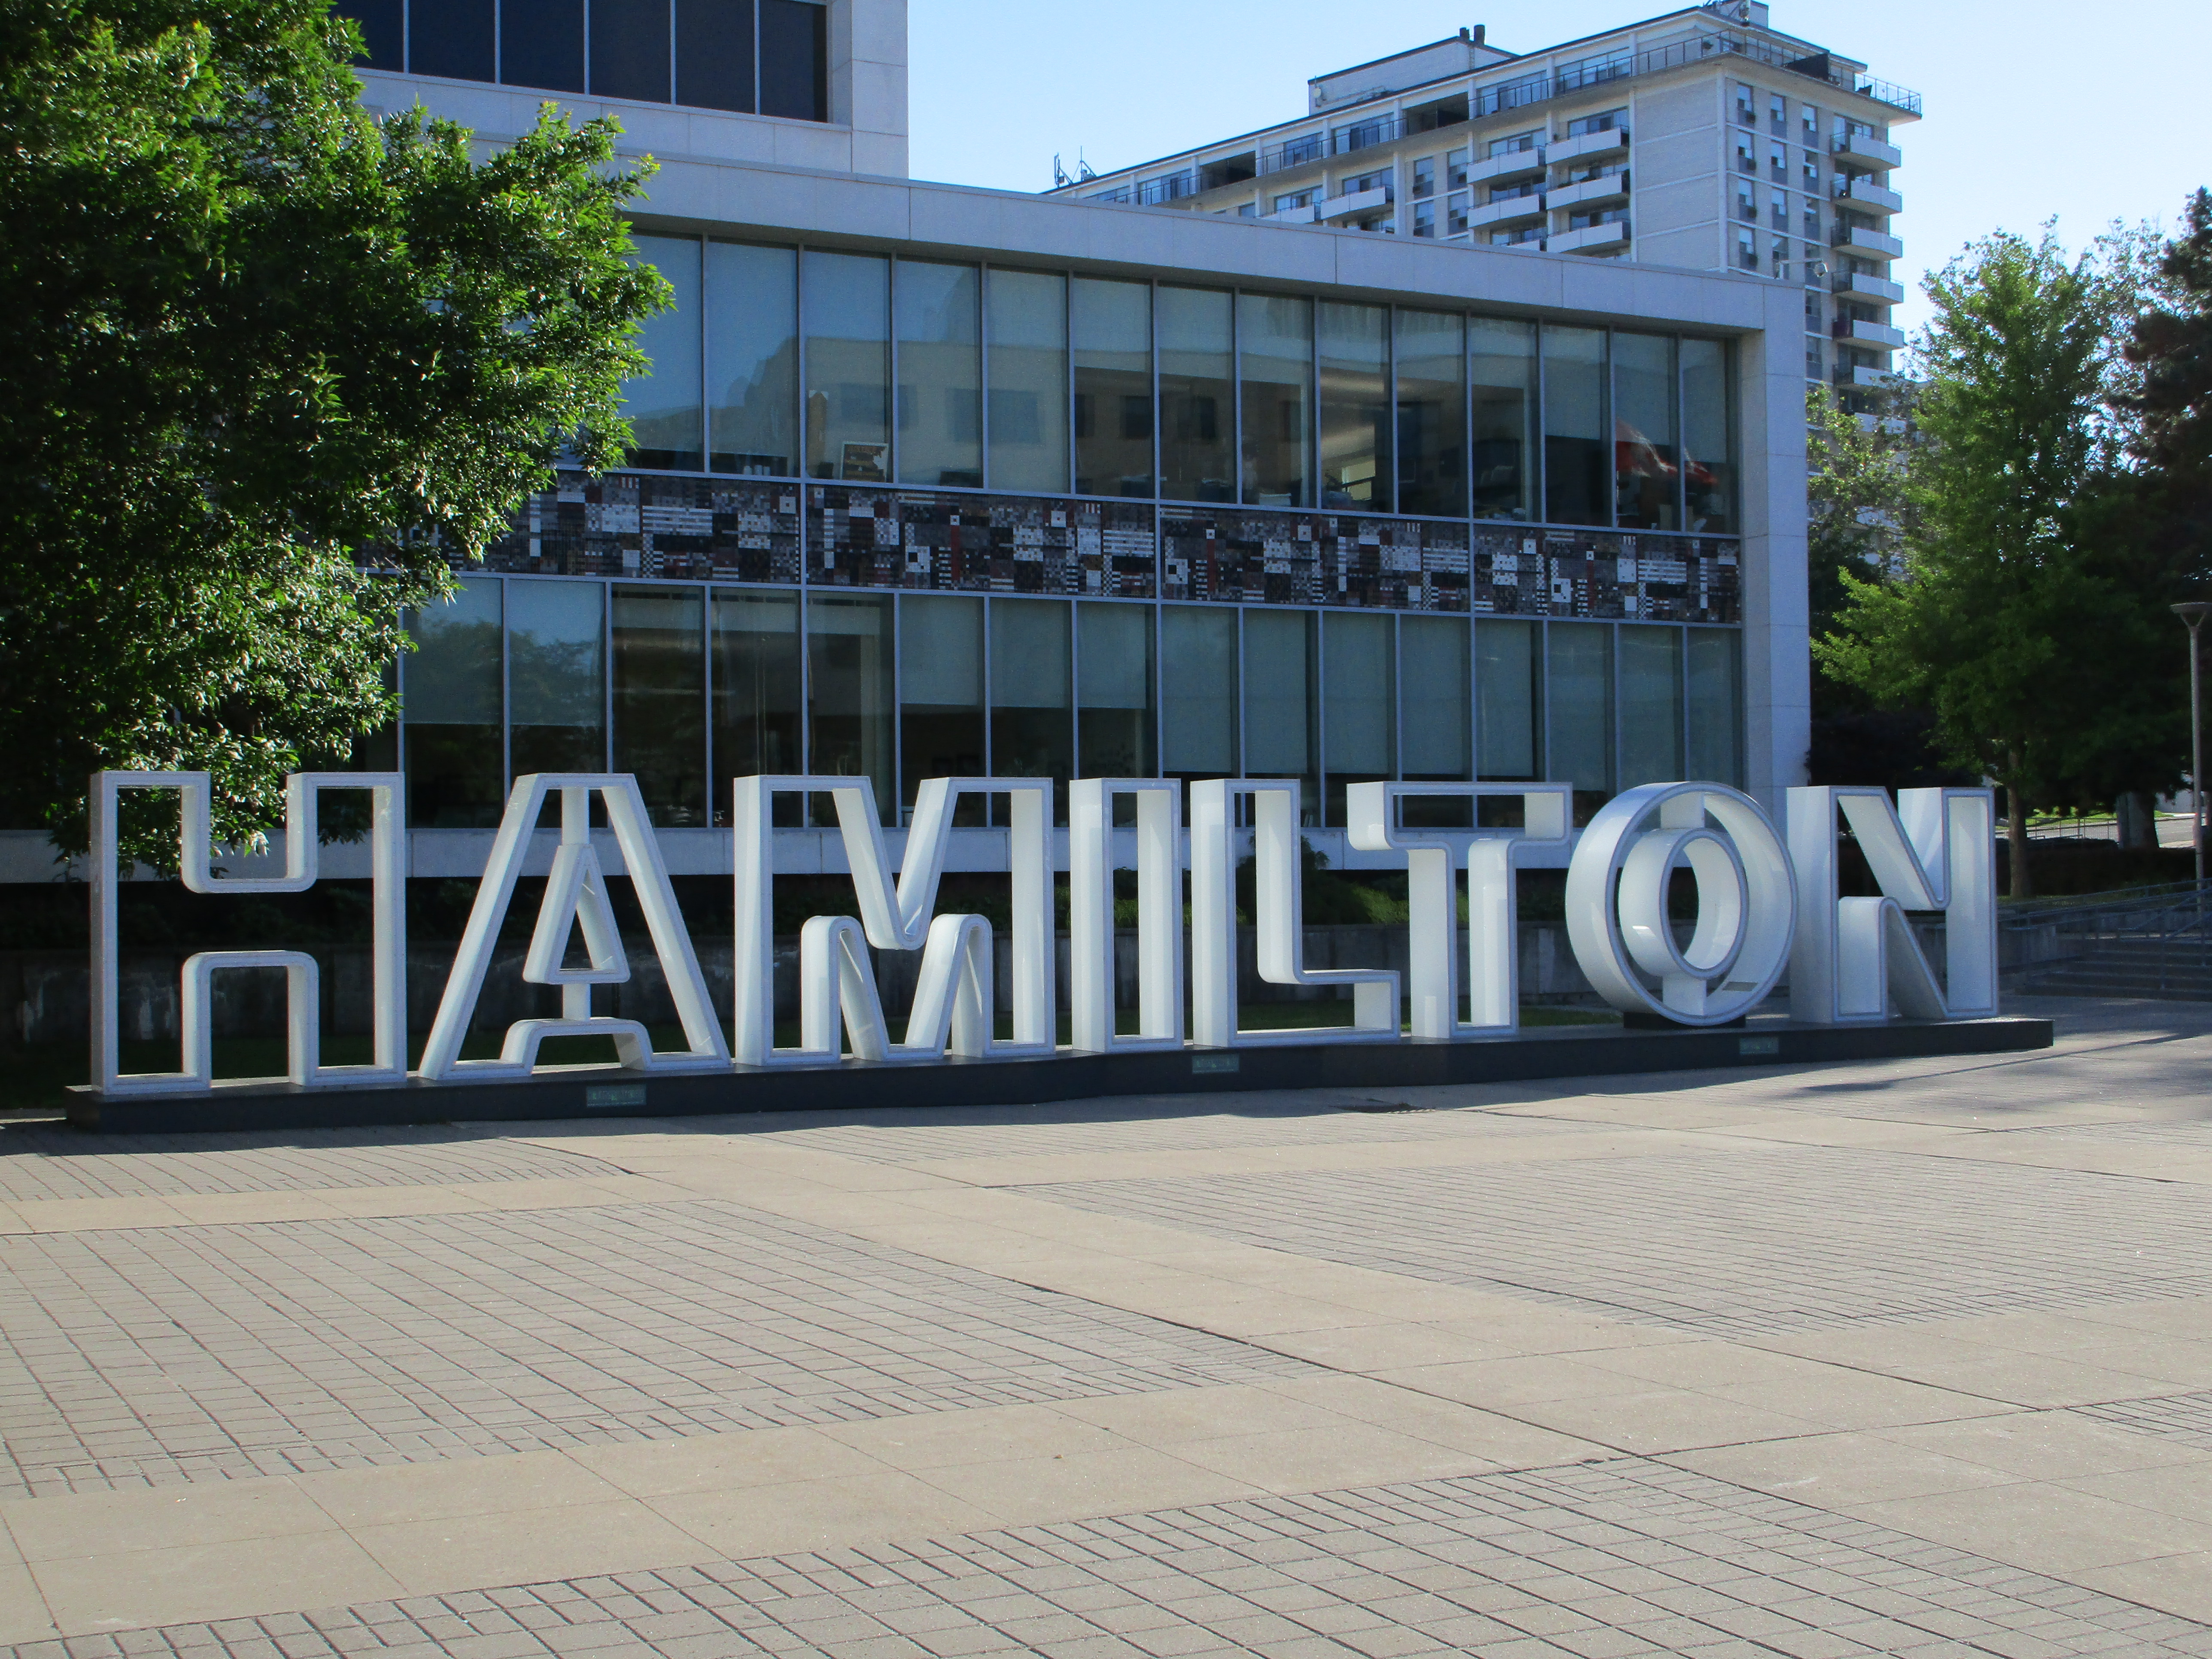 Phones, email not functioning as City of Hamilton deals with ‘cybersecurity incident’